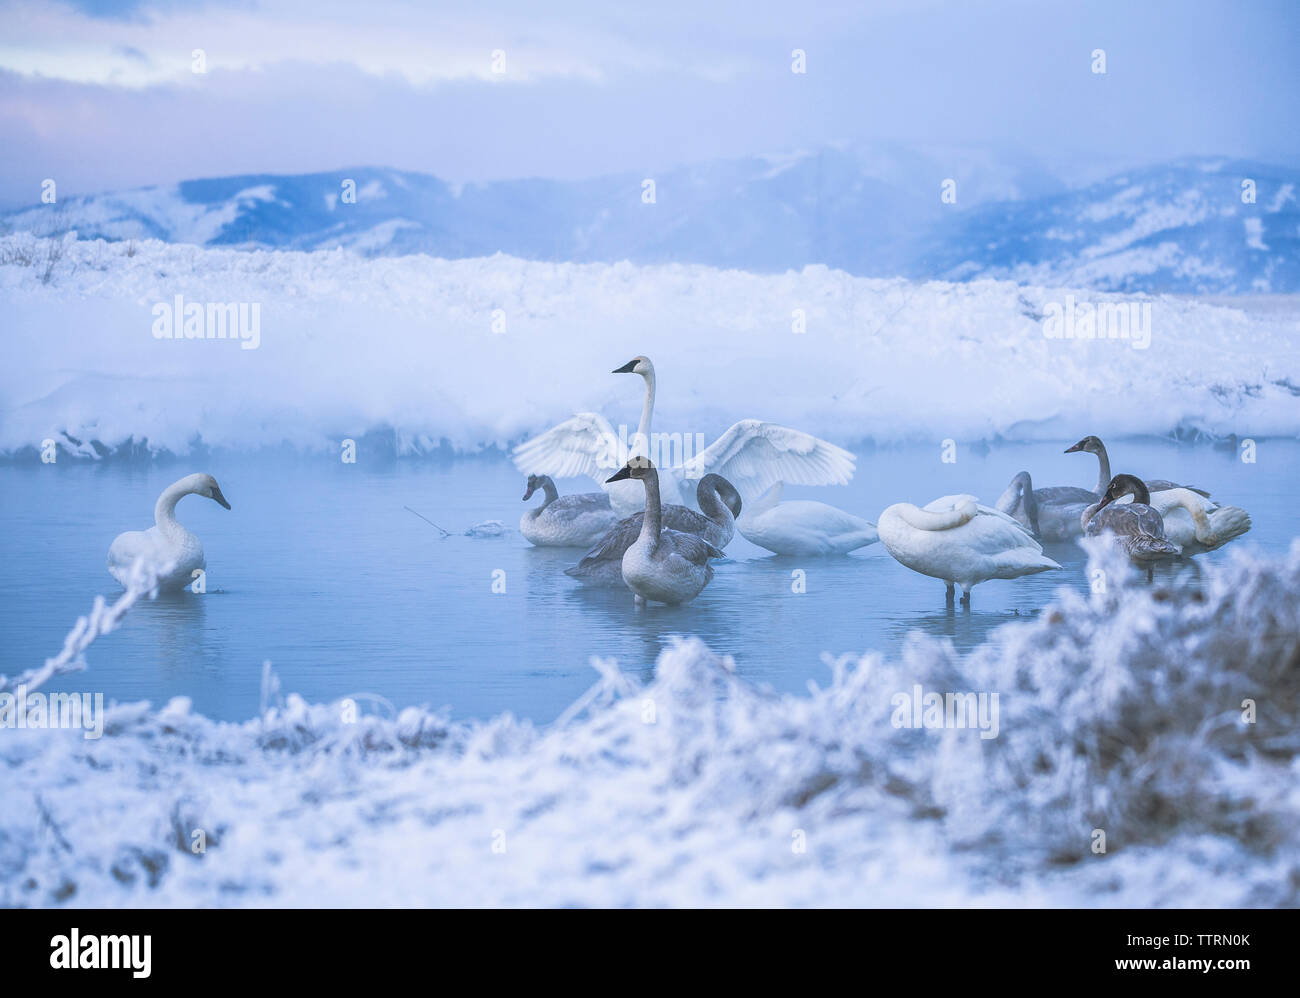 Swans in lake during winter Stock Photo